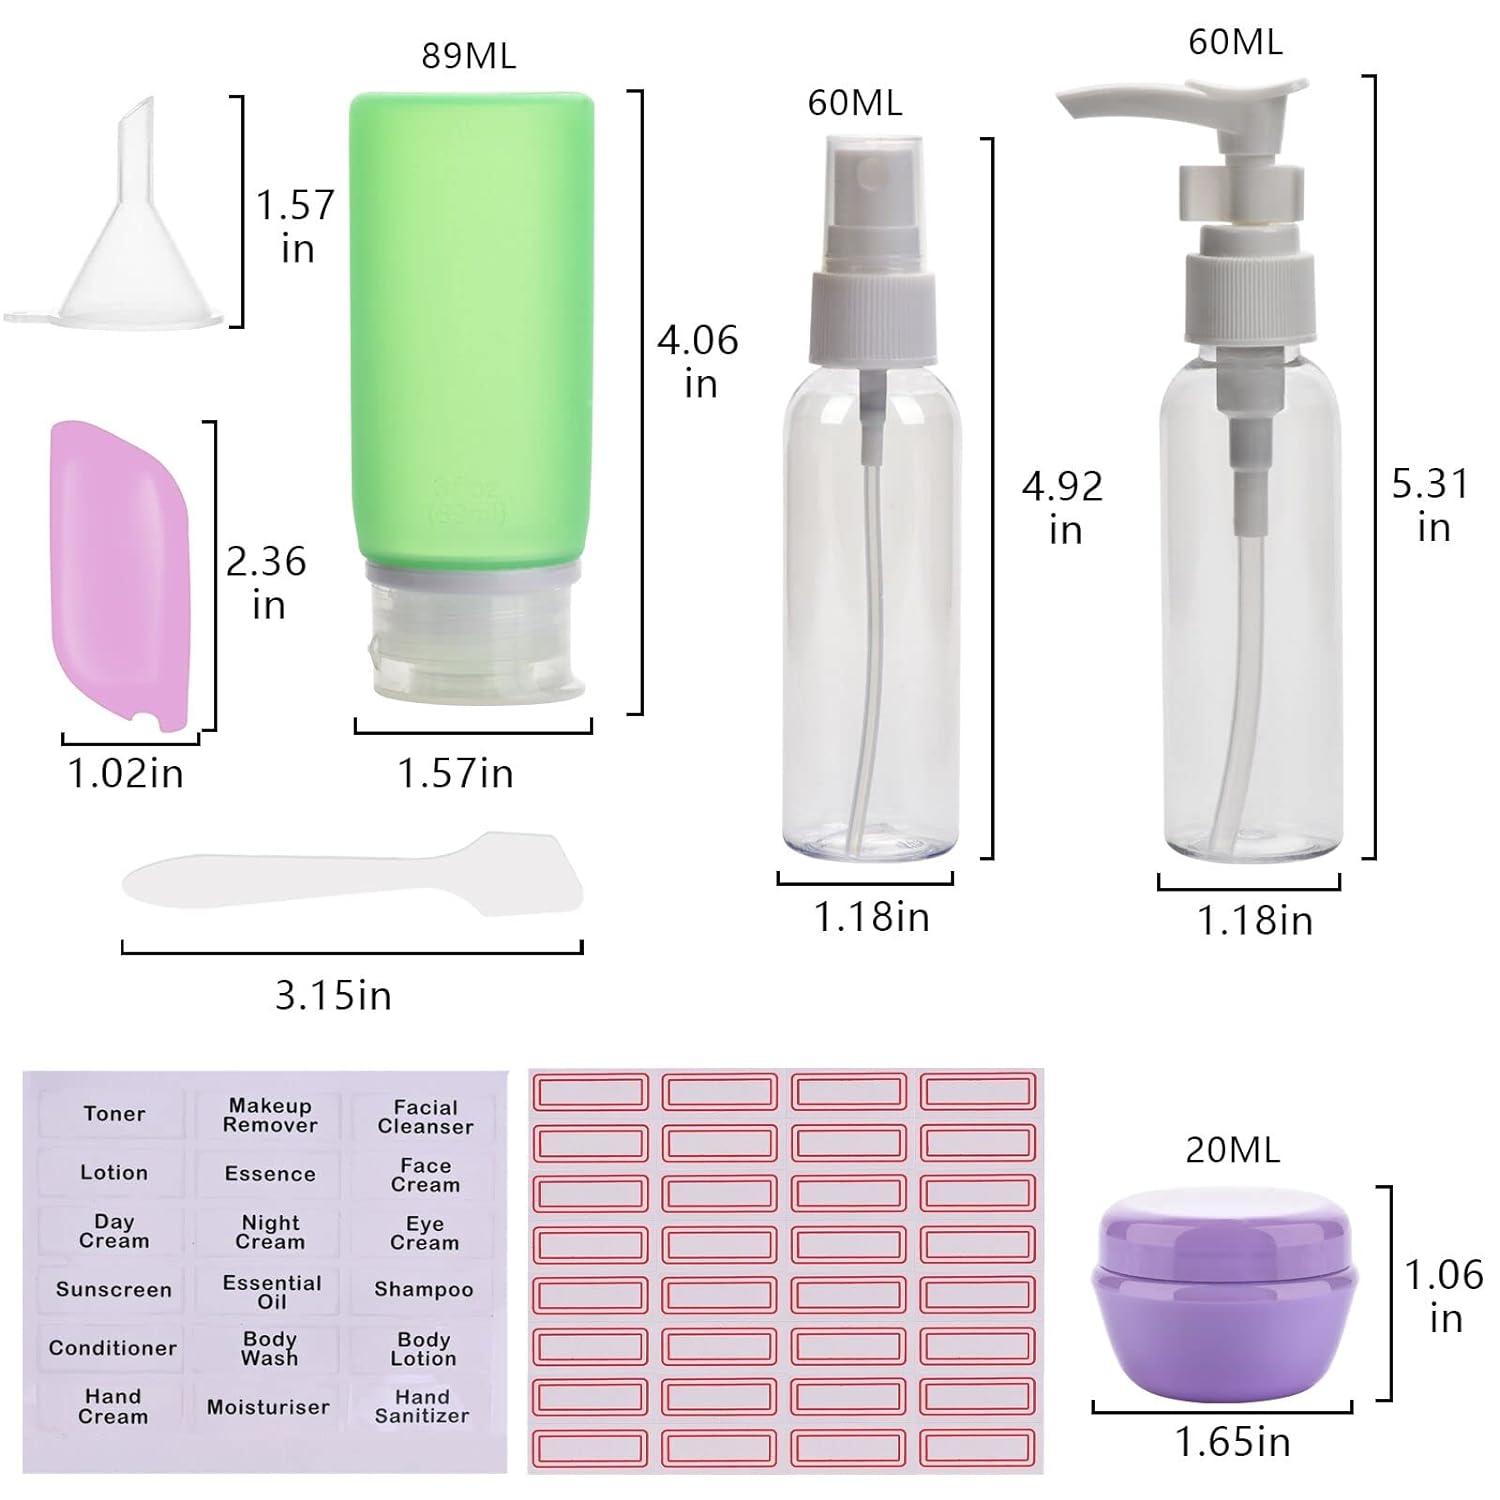  Silicone Travel Bottles, TSA Approved, Leak-Proof Travel  Containers, BPA Free, Refillable Toiletry Bottles for Shampoo, Body Wash, 3  bottle set, airplane, accessories : Beauty & Personal Care